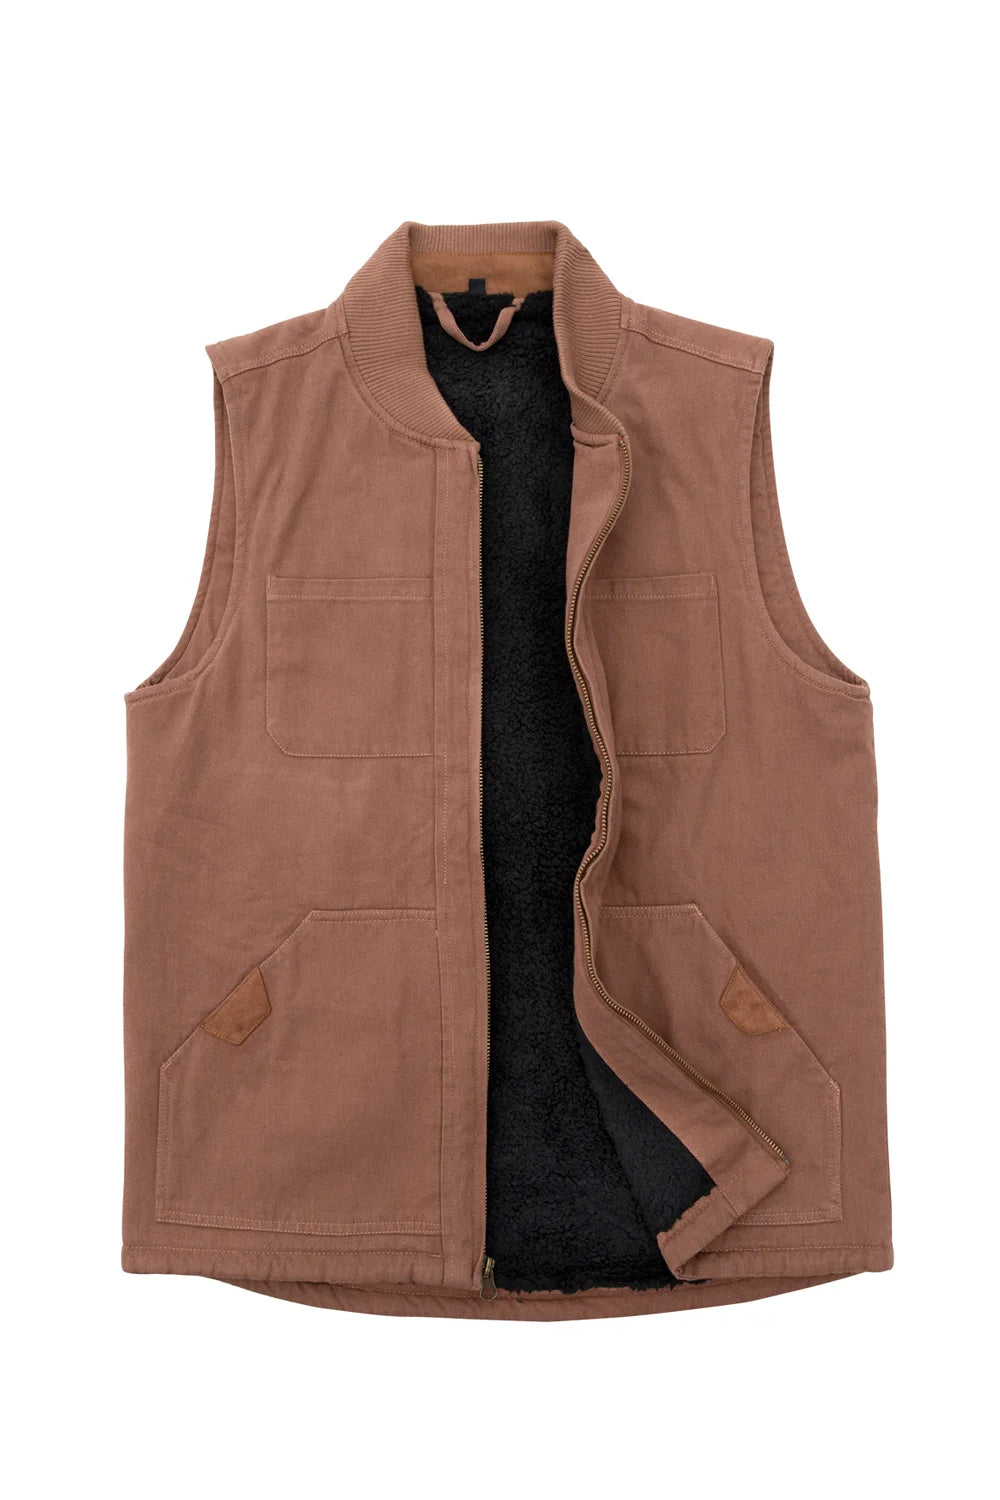 Men's Work Utility Canvas Vest, Sherpa Lined, Brown / S